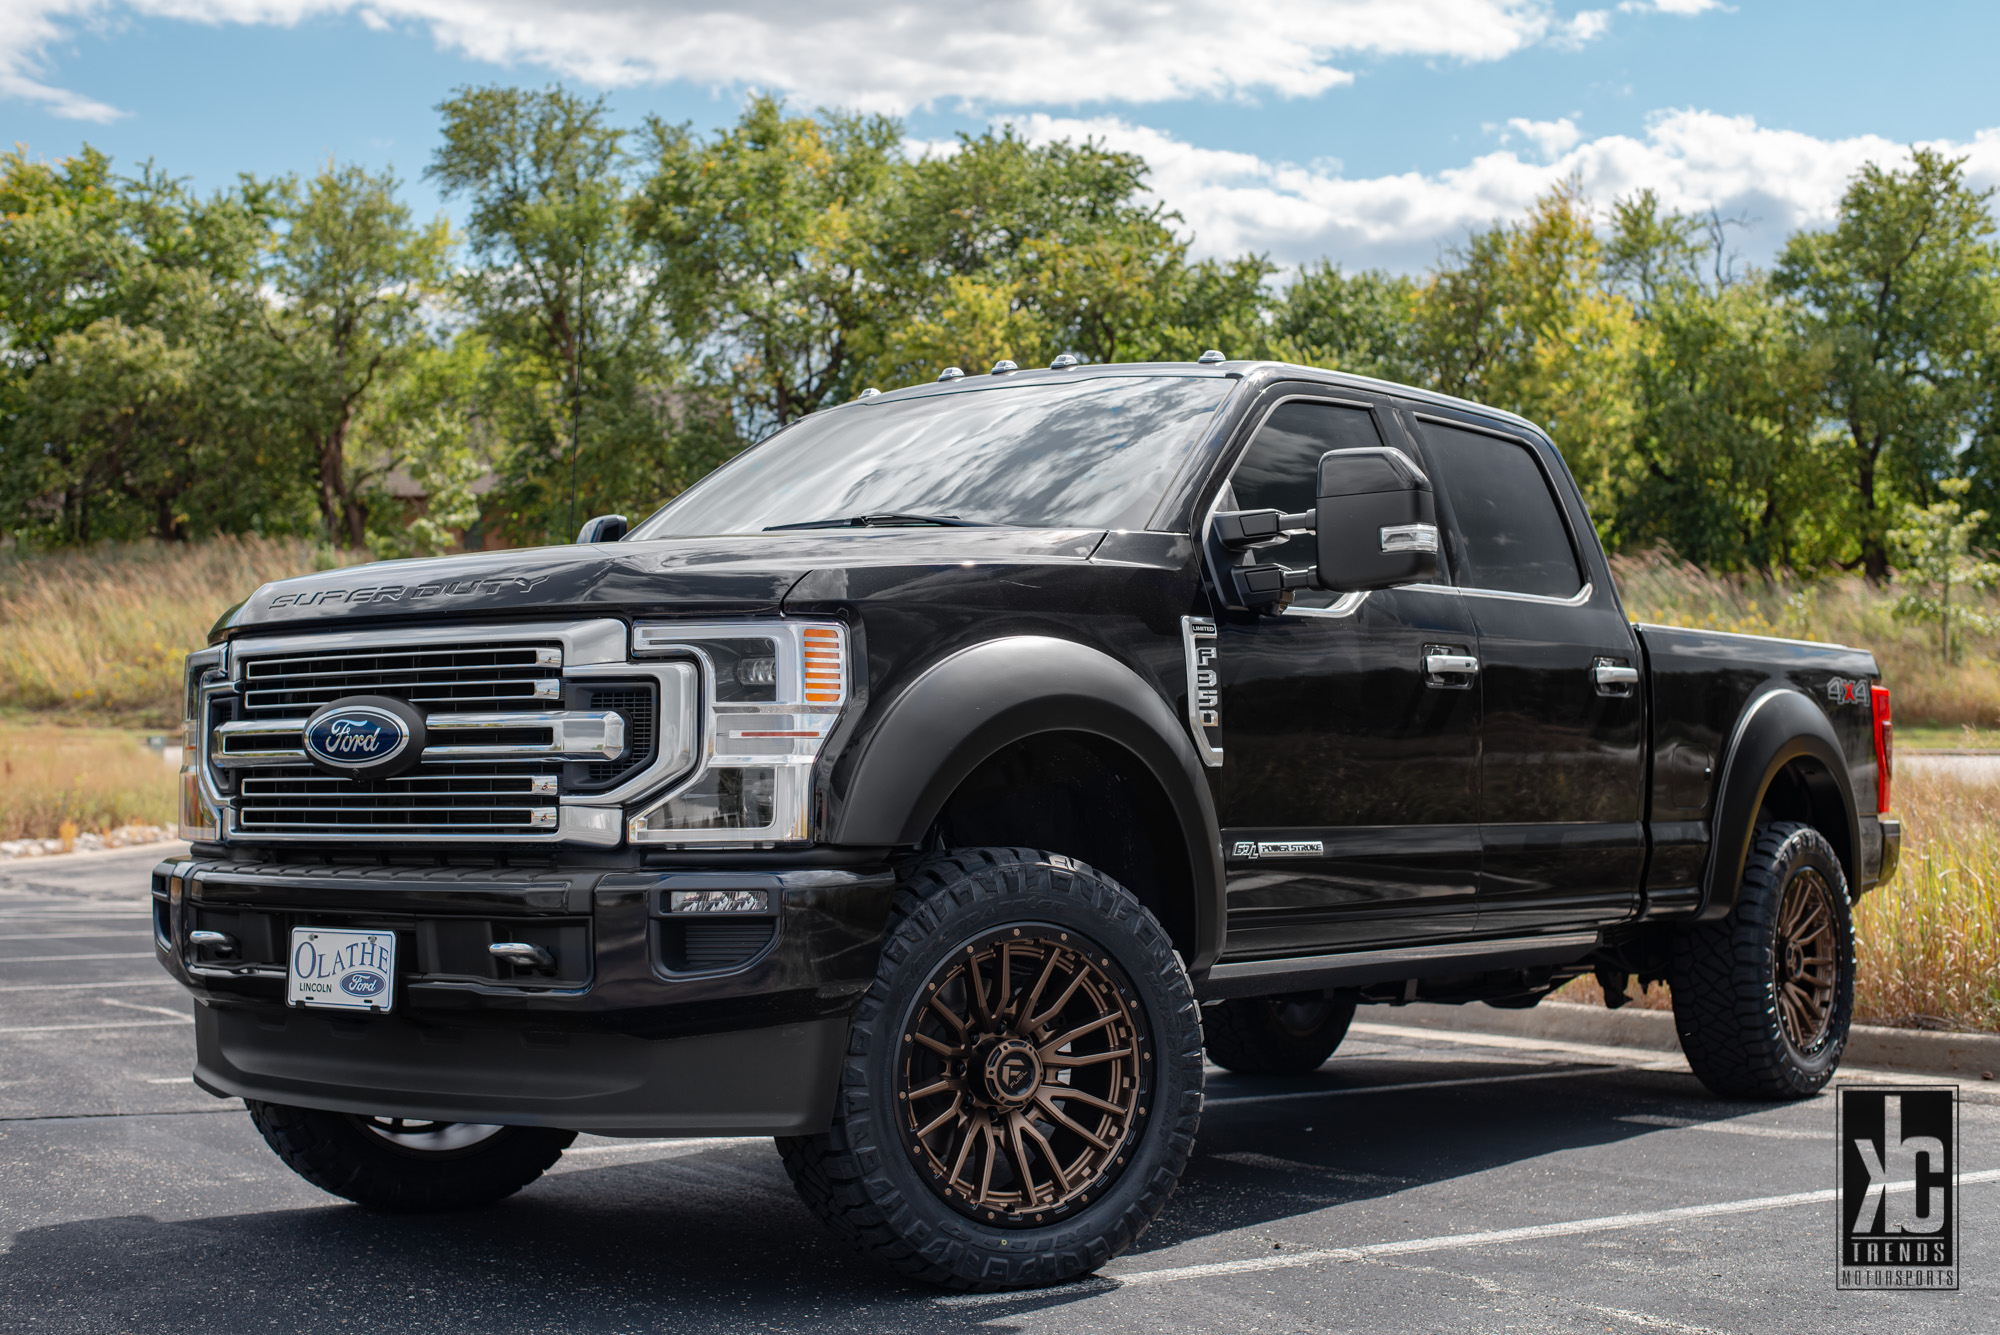  Ford F-350 Super Duty with Fuel 1-Piece Wheels Rebel 8 - D681